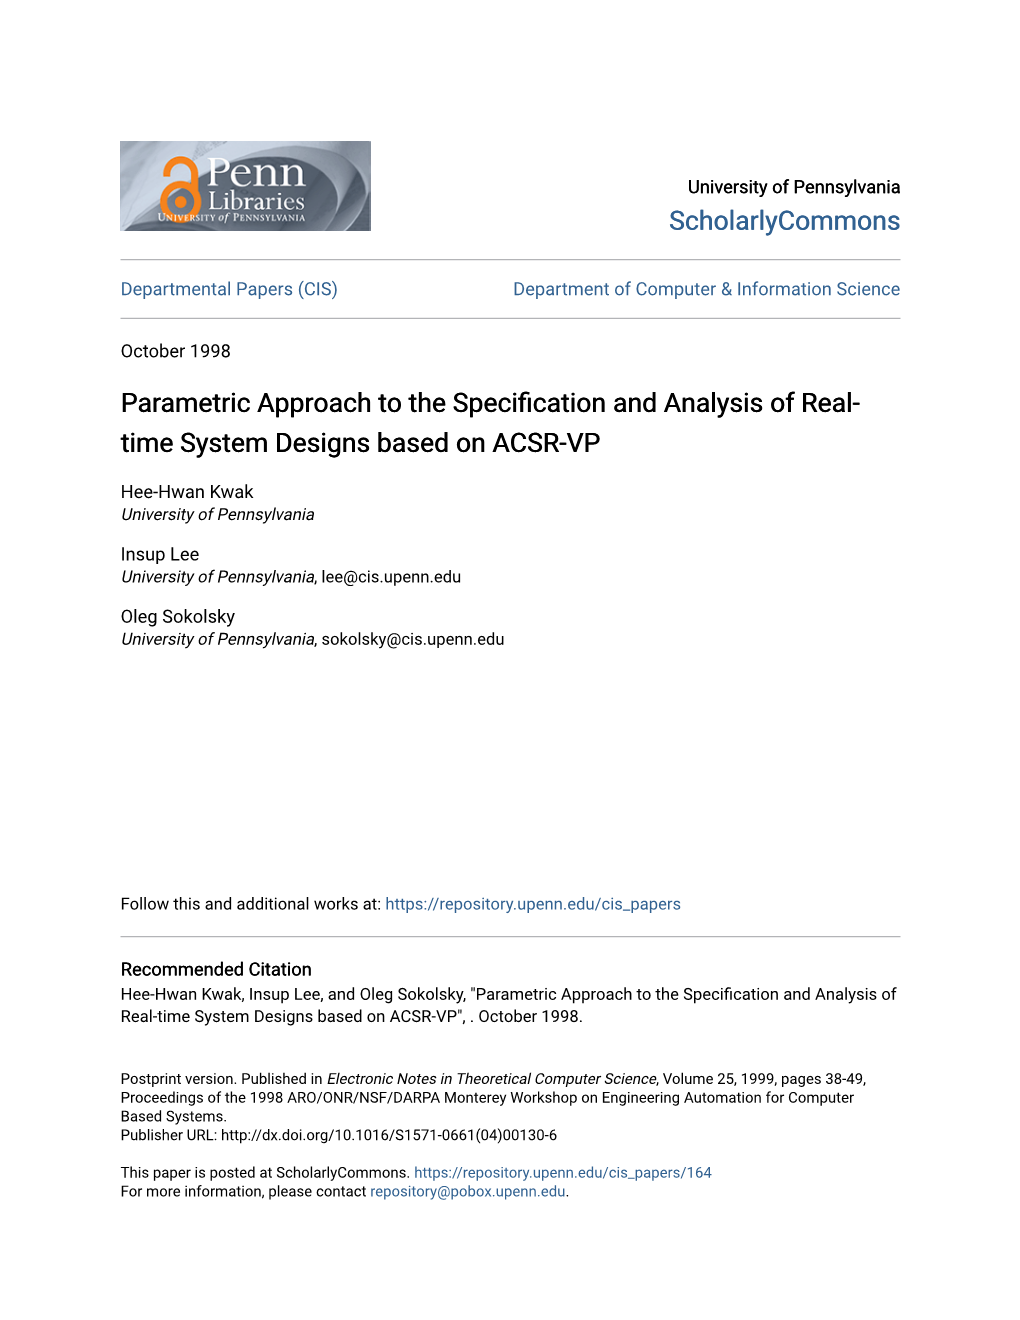 Parametric Approach to the Specification and Analysis of Real- Time System Designs Based on ACSR-VP